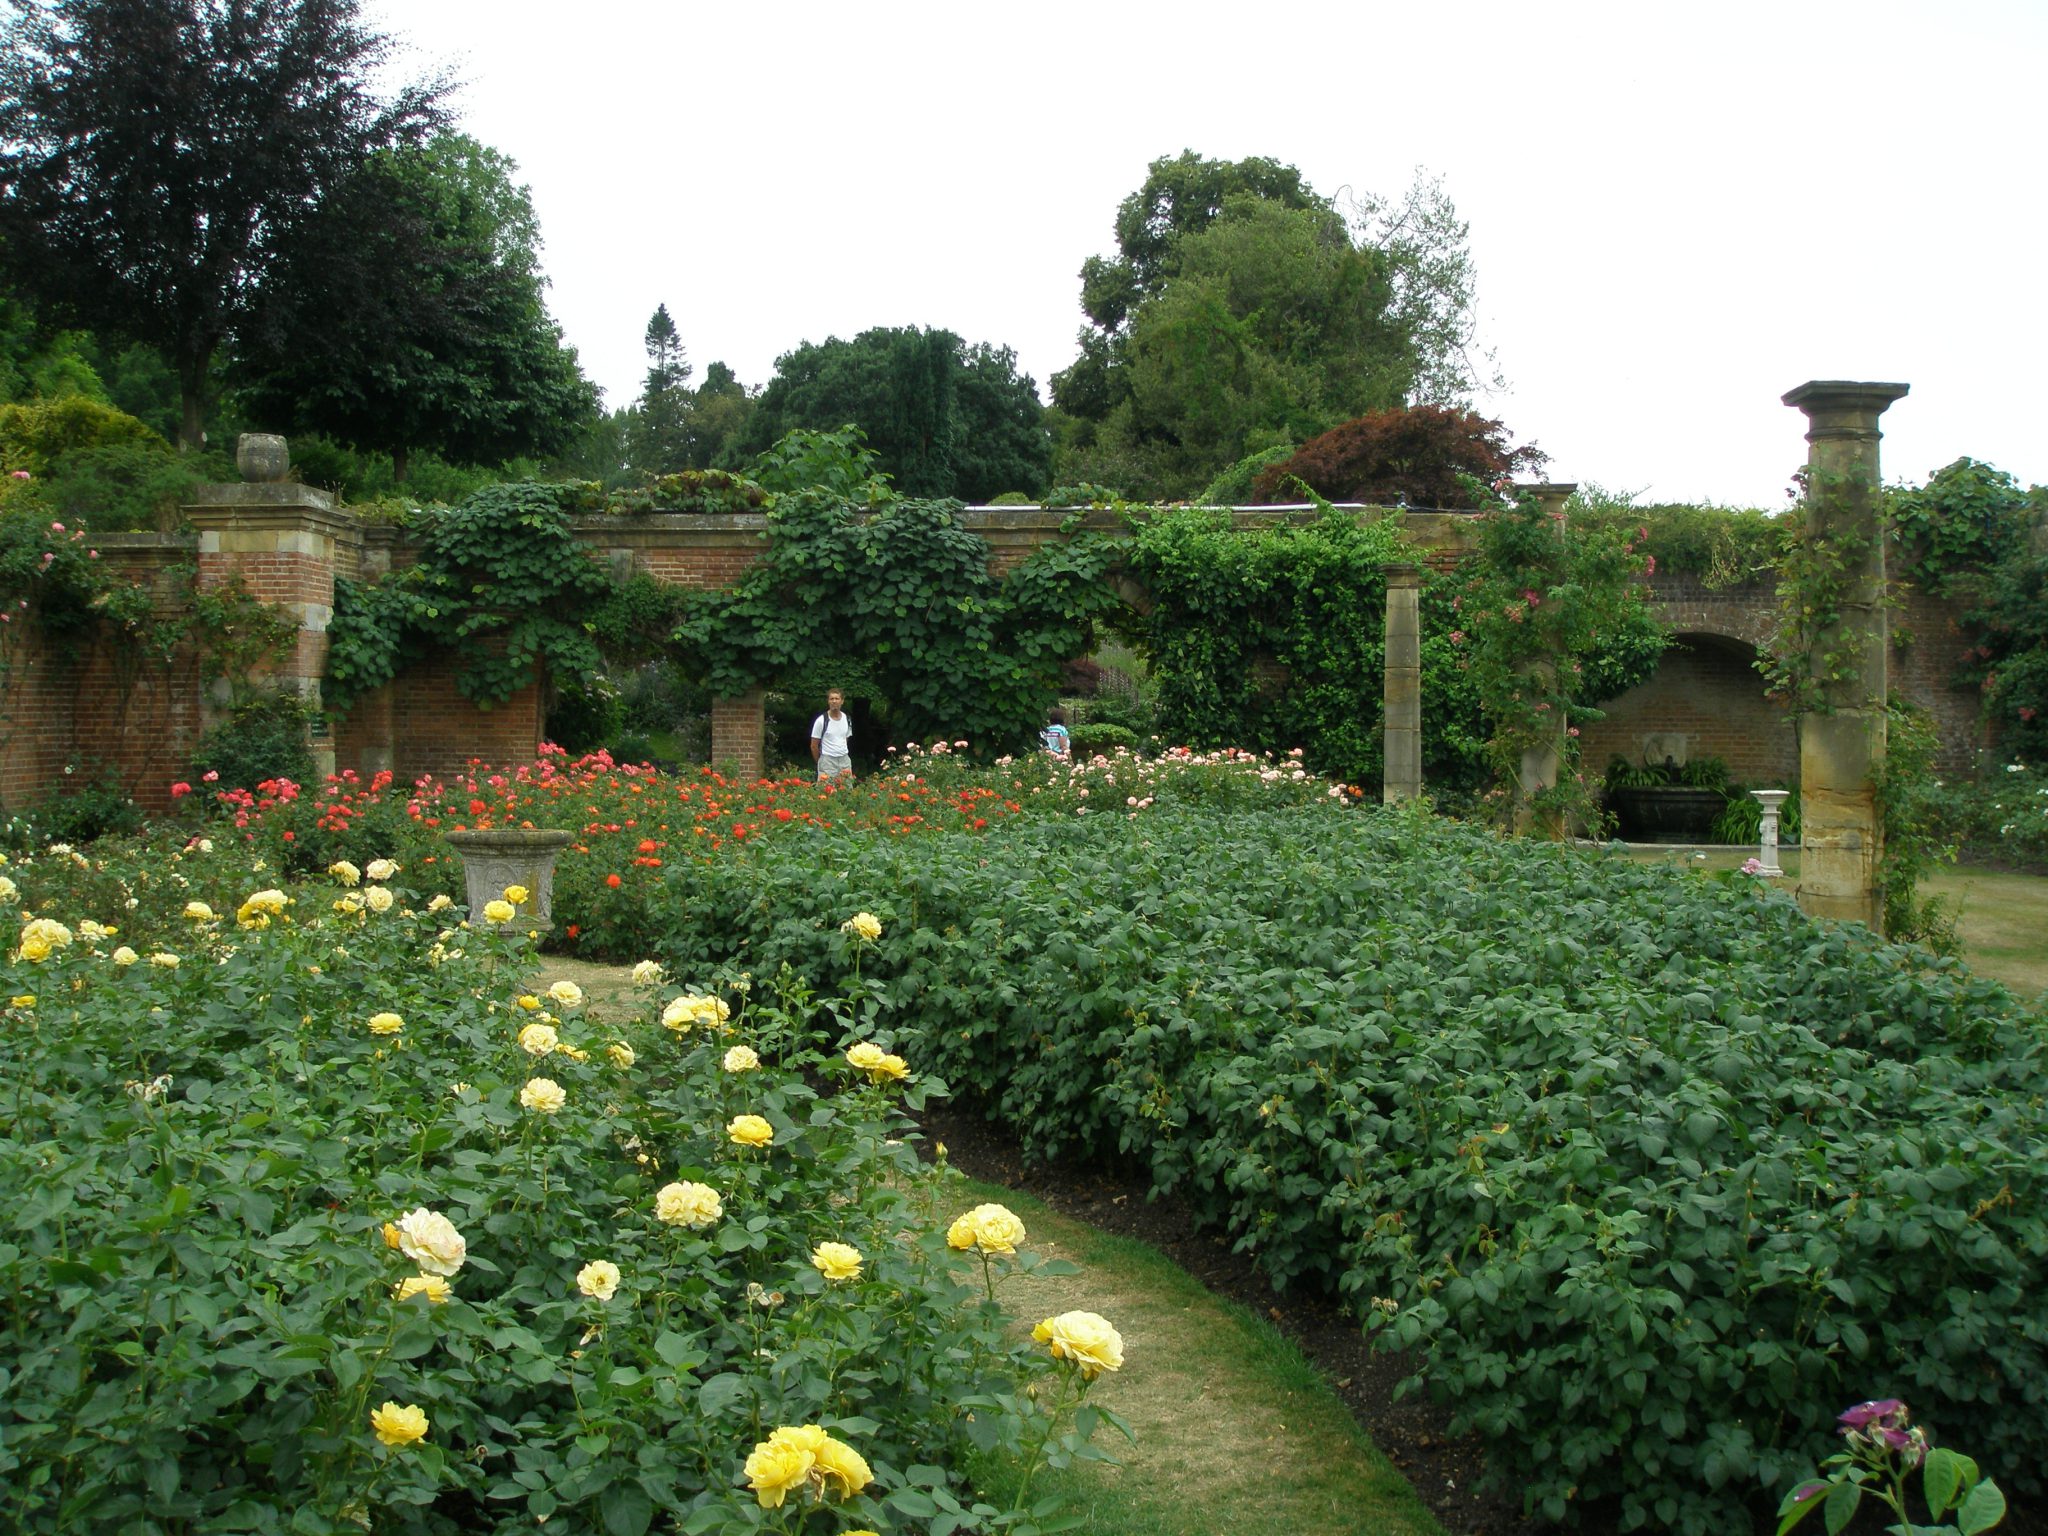 Another view of Astor's Rose Garden